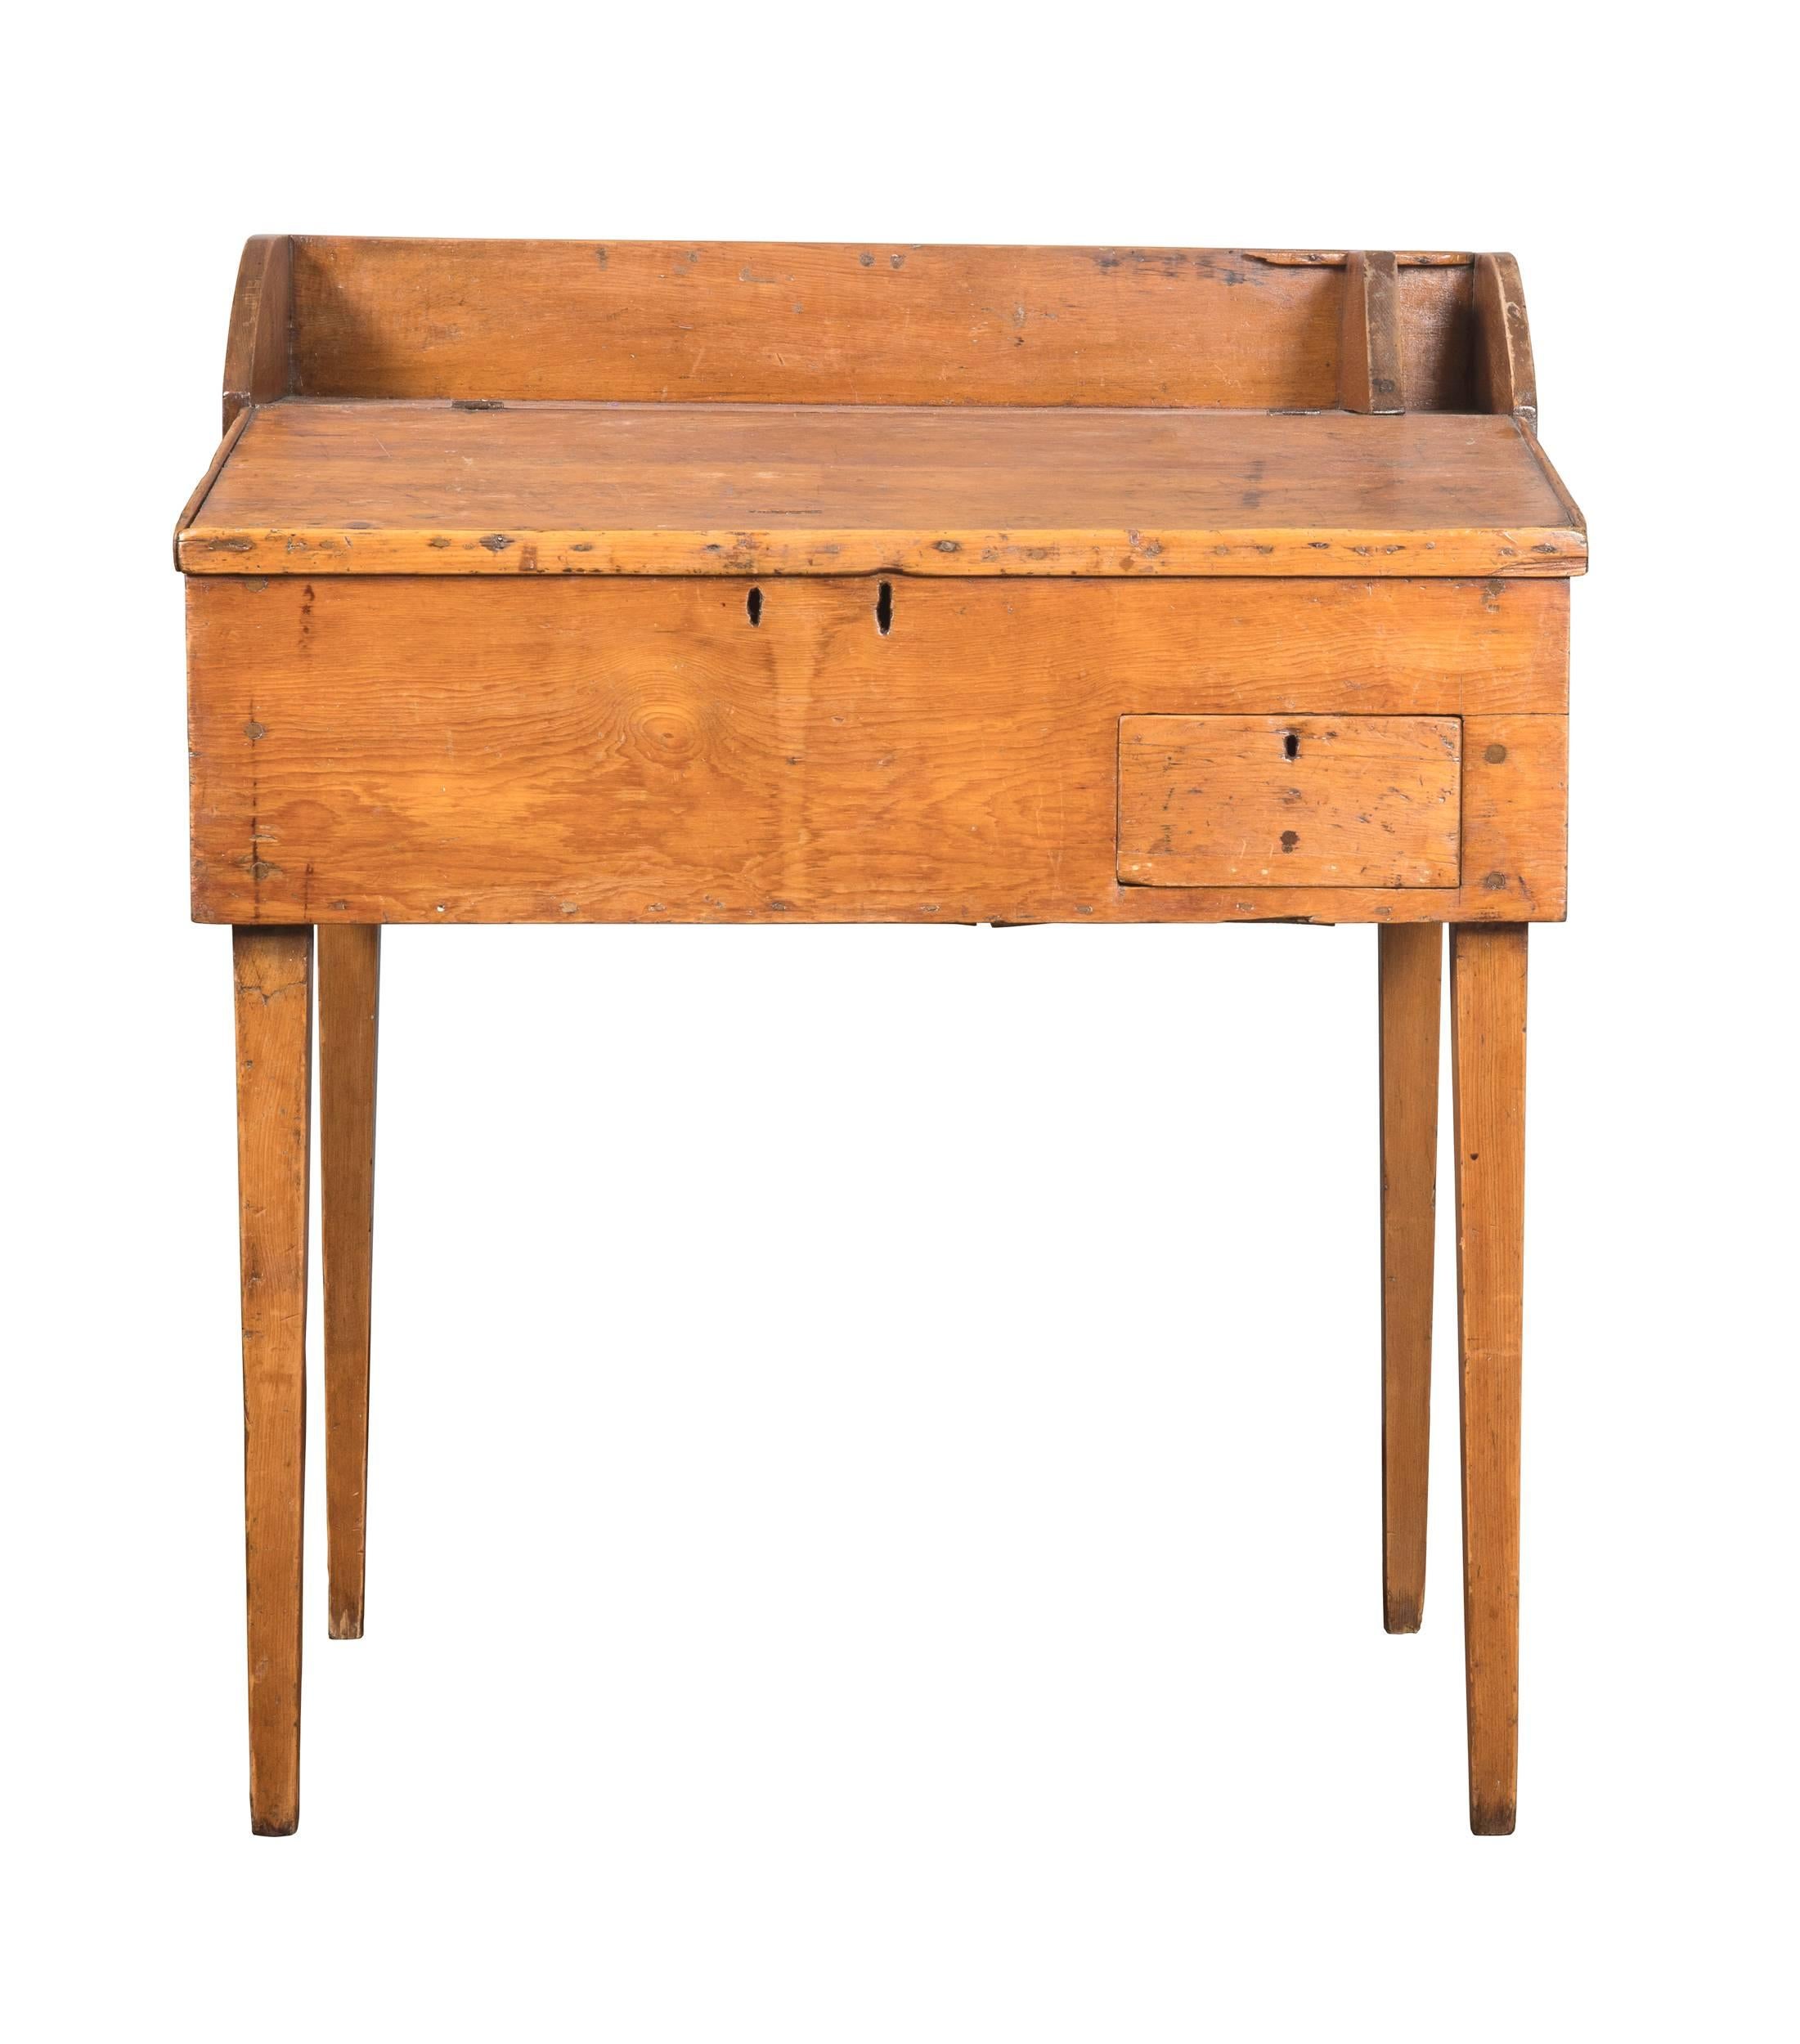 19th century primitive Americana pine desk. Slightly slant top opens to storage below with cubby slots. There are also slots to hold notes and pencils above the desk area and a small drawer below. Pine wood is wonderfully patinated and aged over the